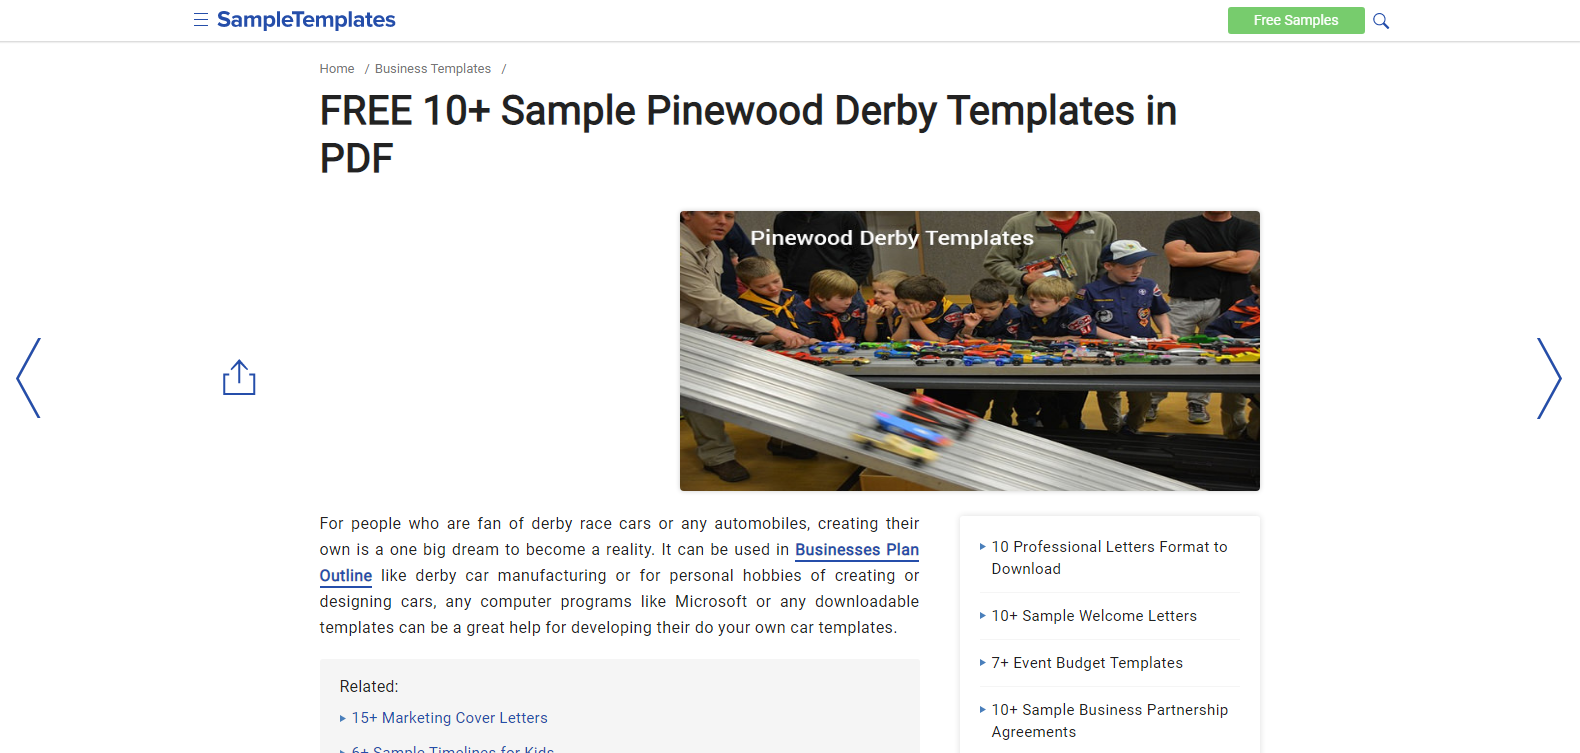 Pinewood derby free template sampletemplates